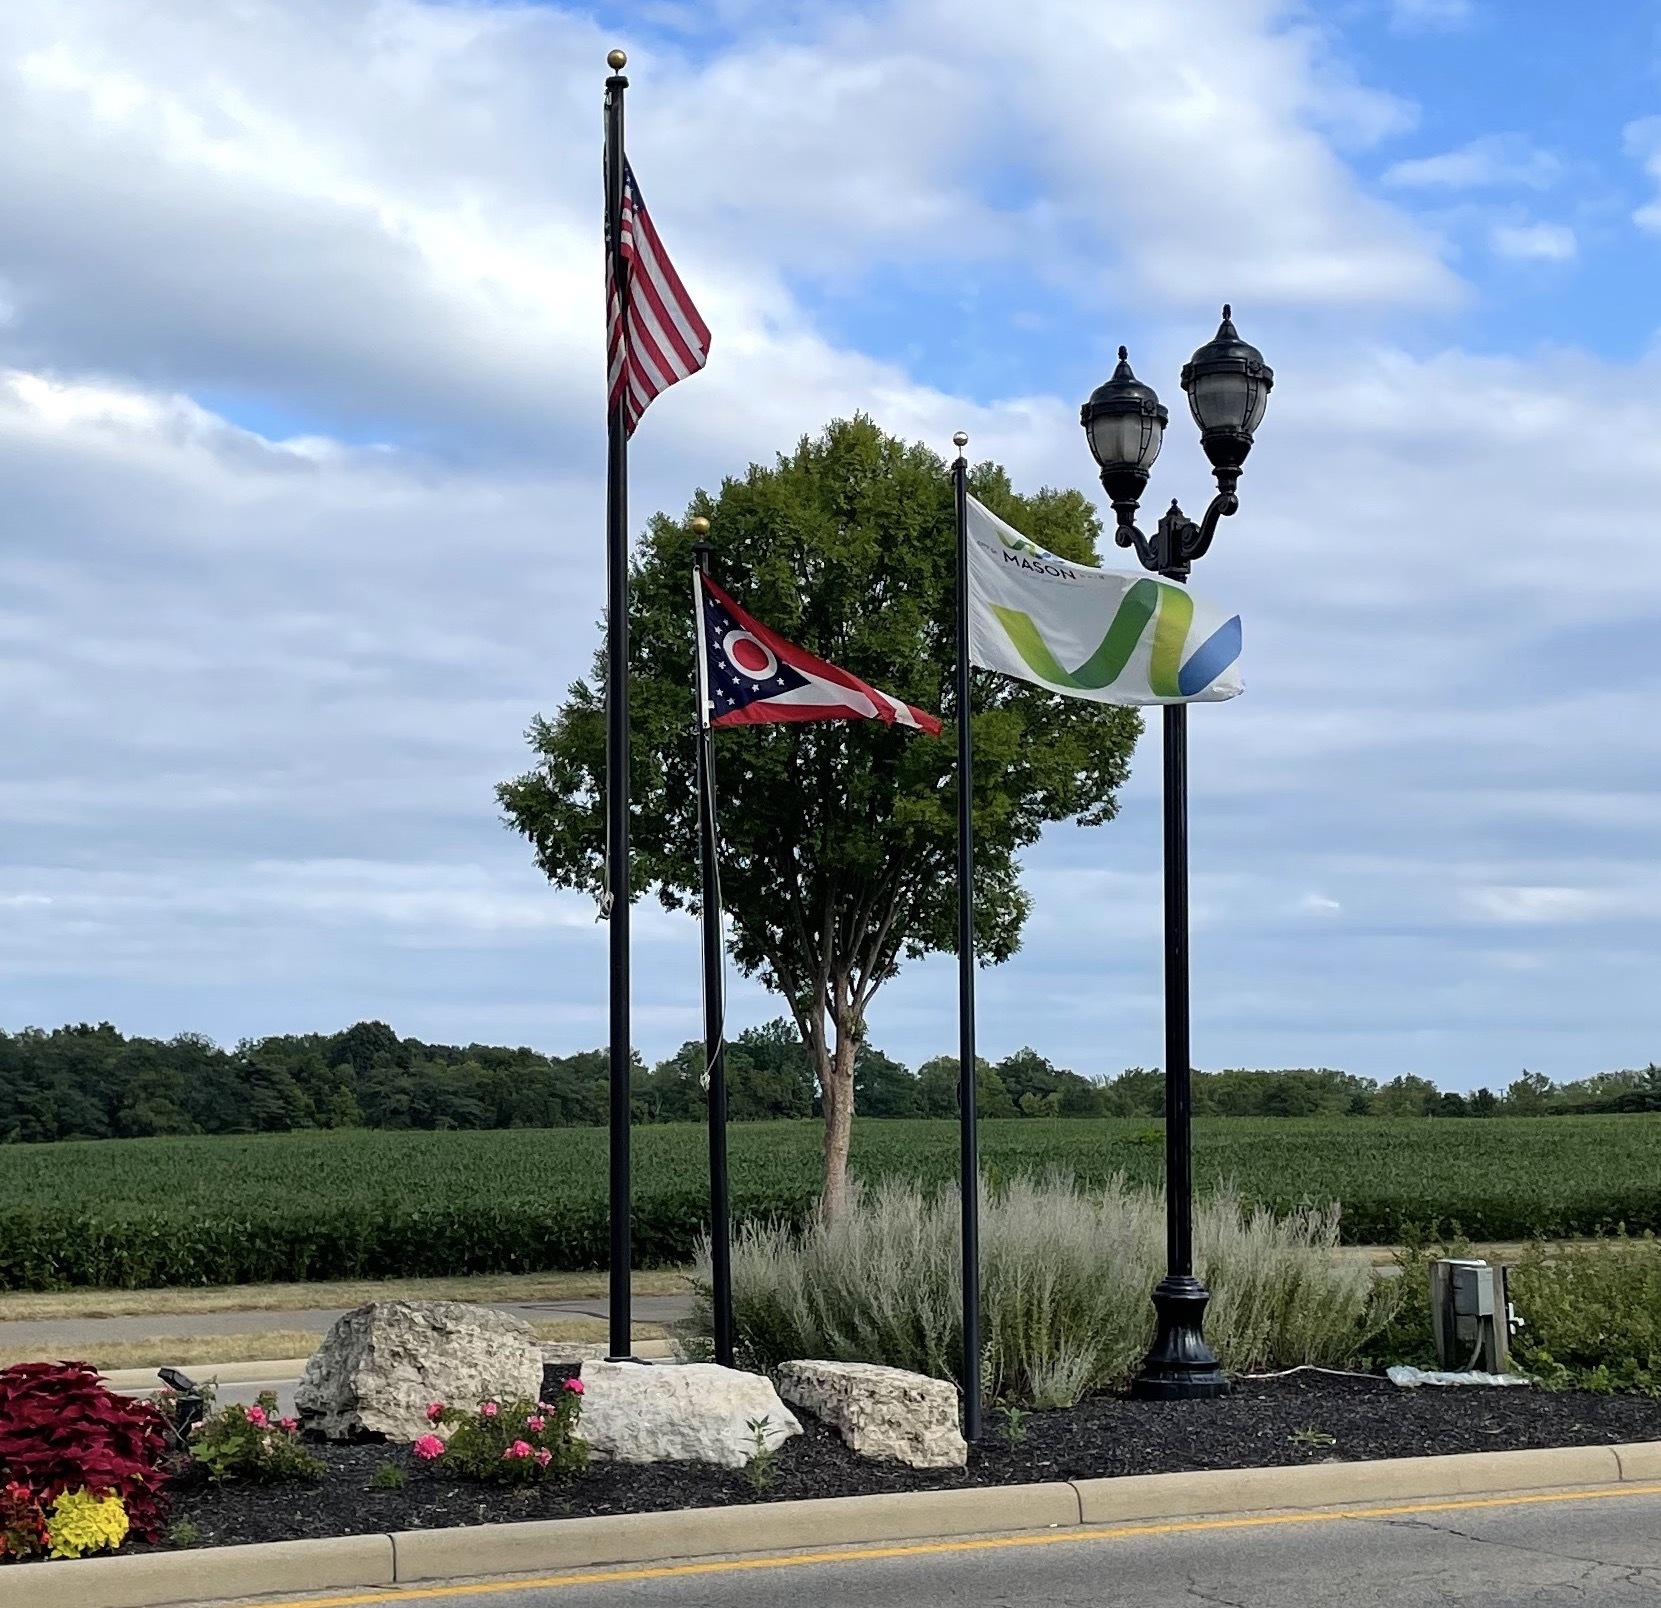 An island on Mason-Montgomery Road with flags of the USA, Ohio, and Mason surrounded by landscaping